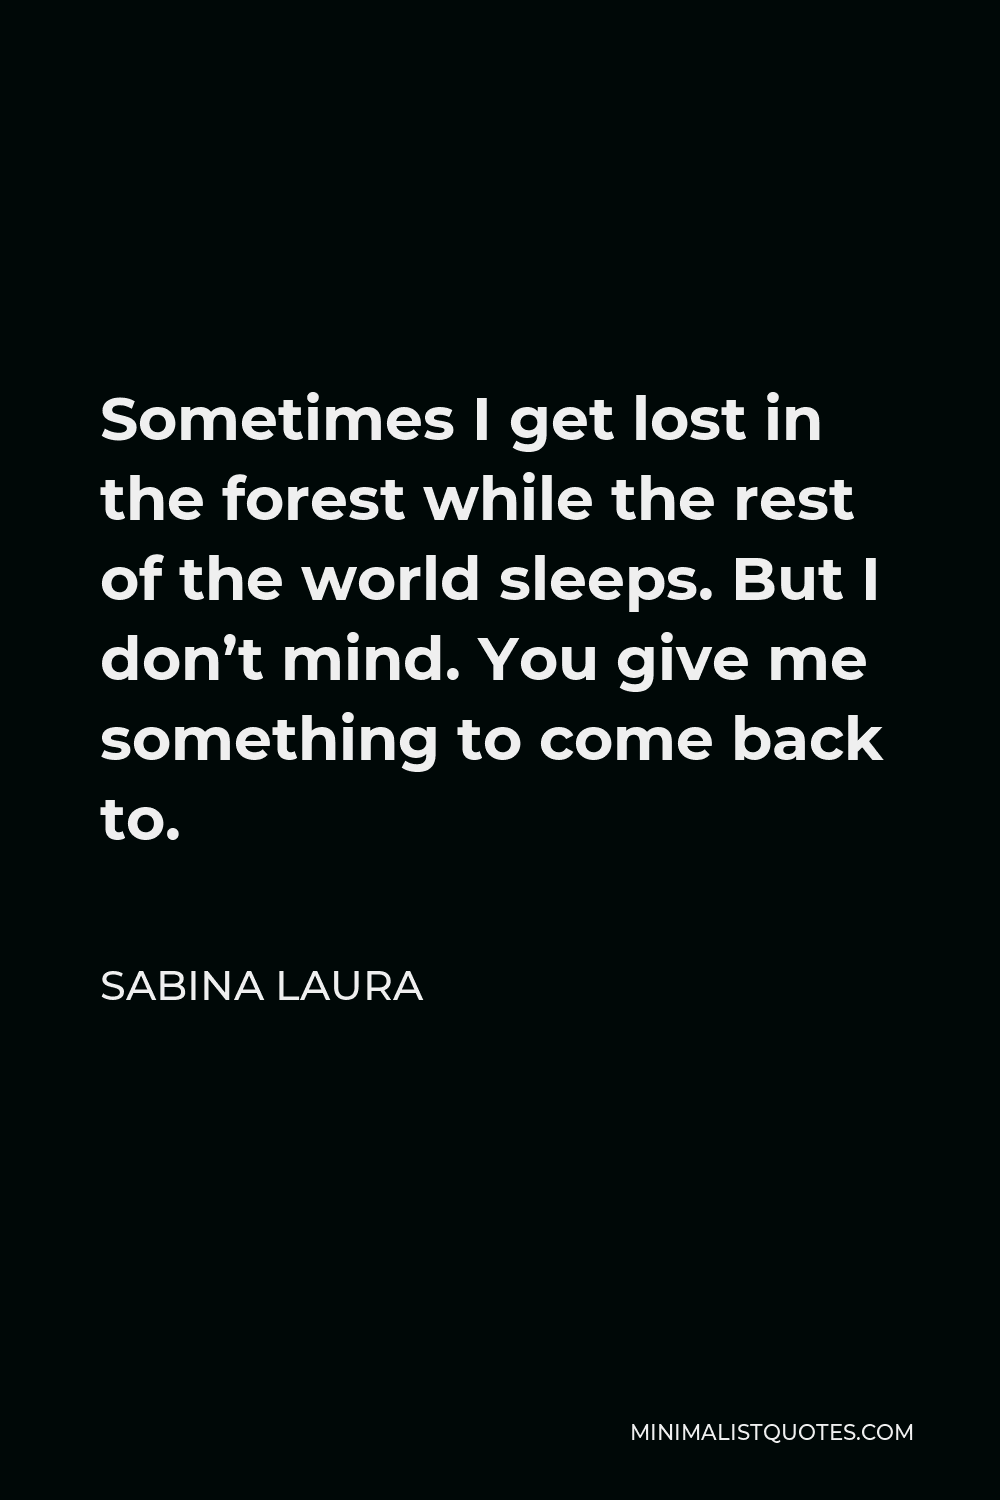 Sabina Laura Quote - Sometimes I get lost in the forest while the rest of the world sleeps. But I don’t mind. You give me something to come back to.